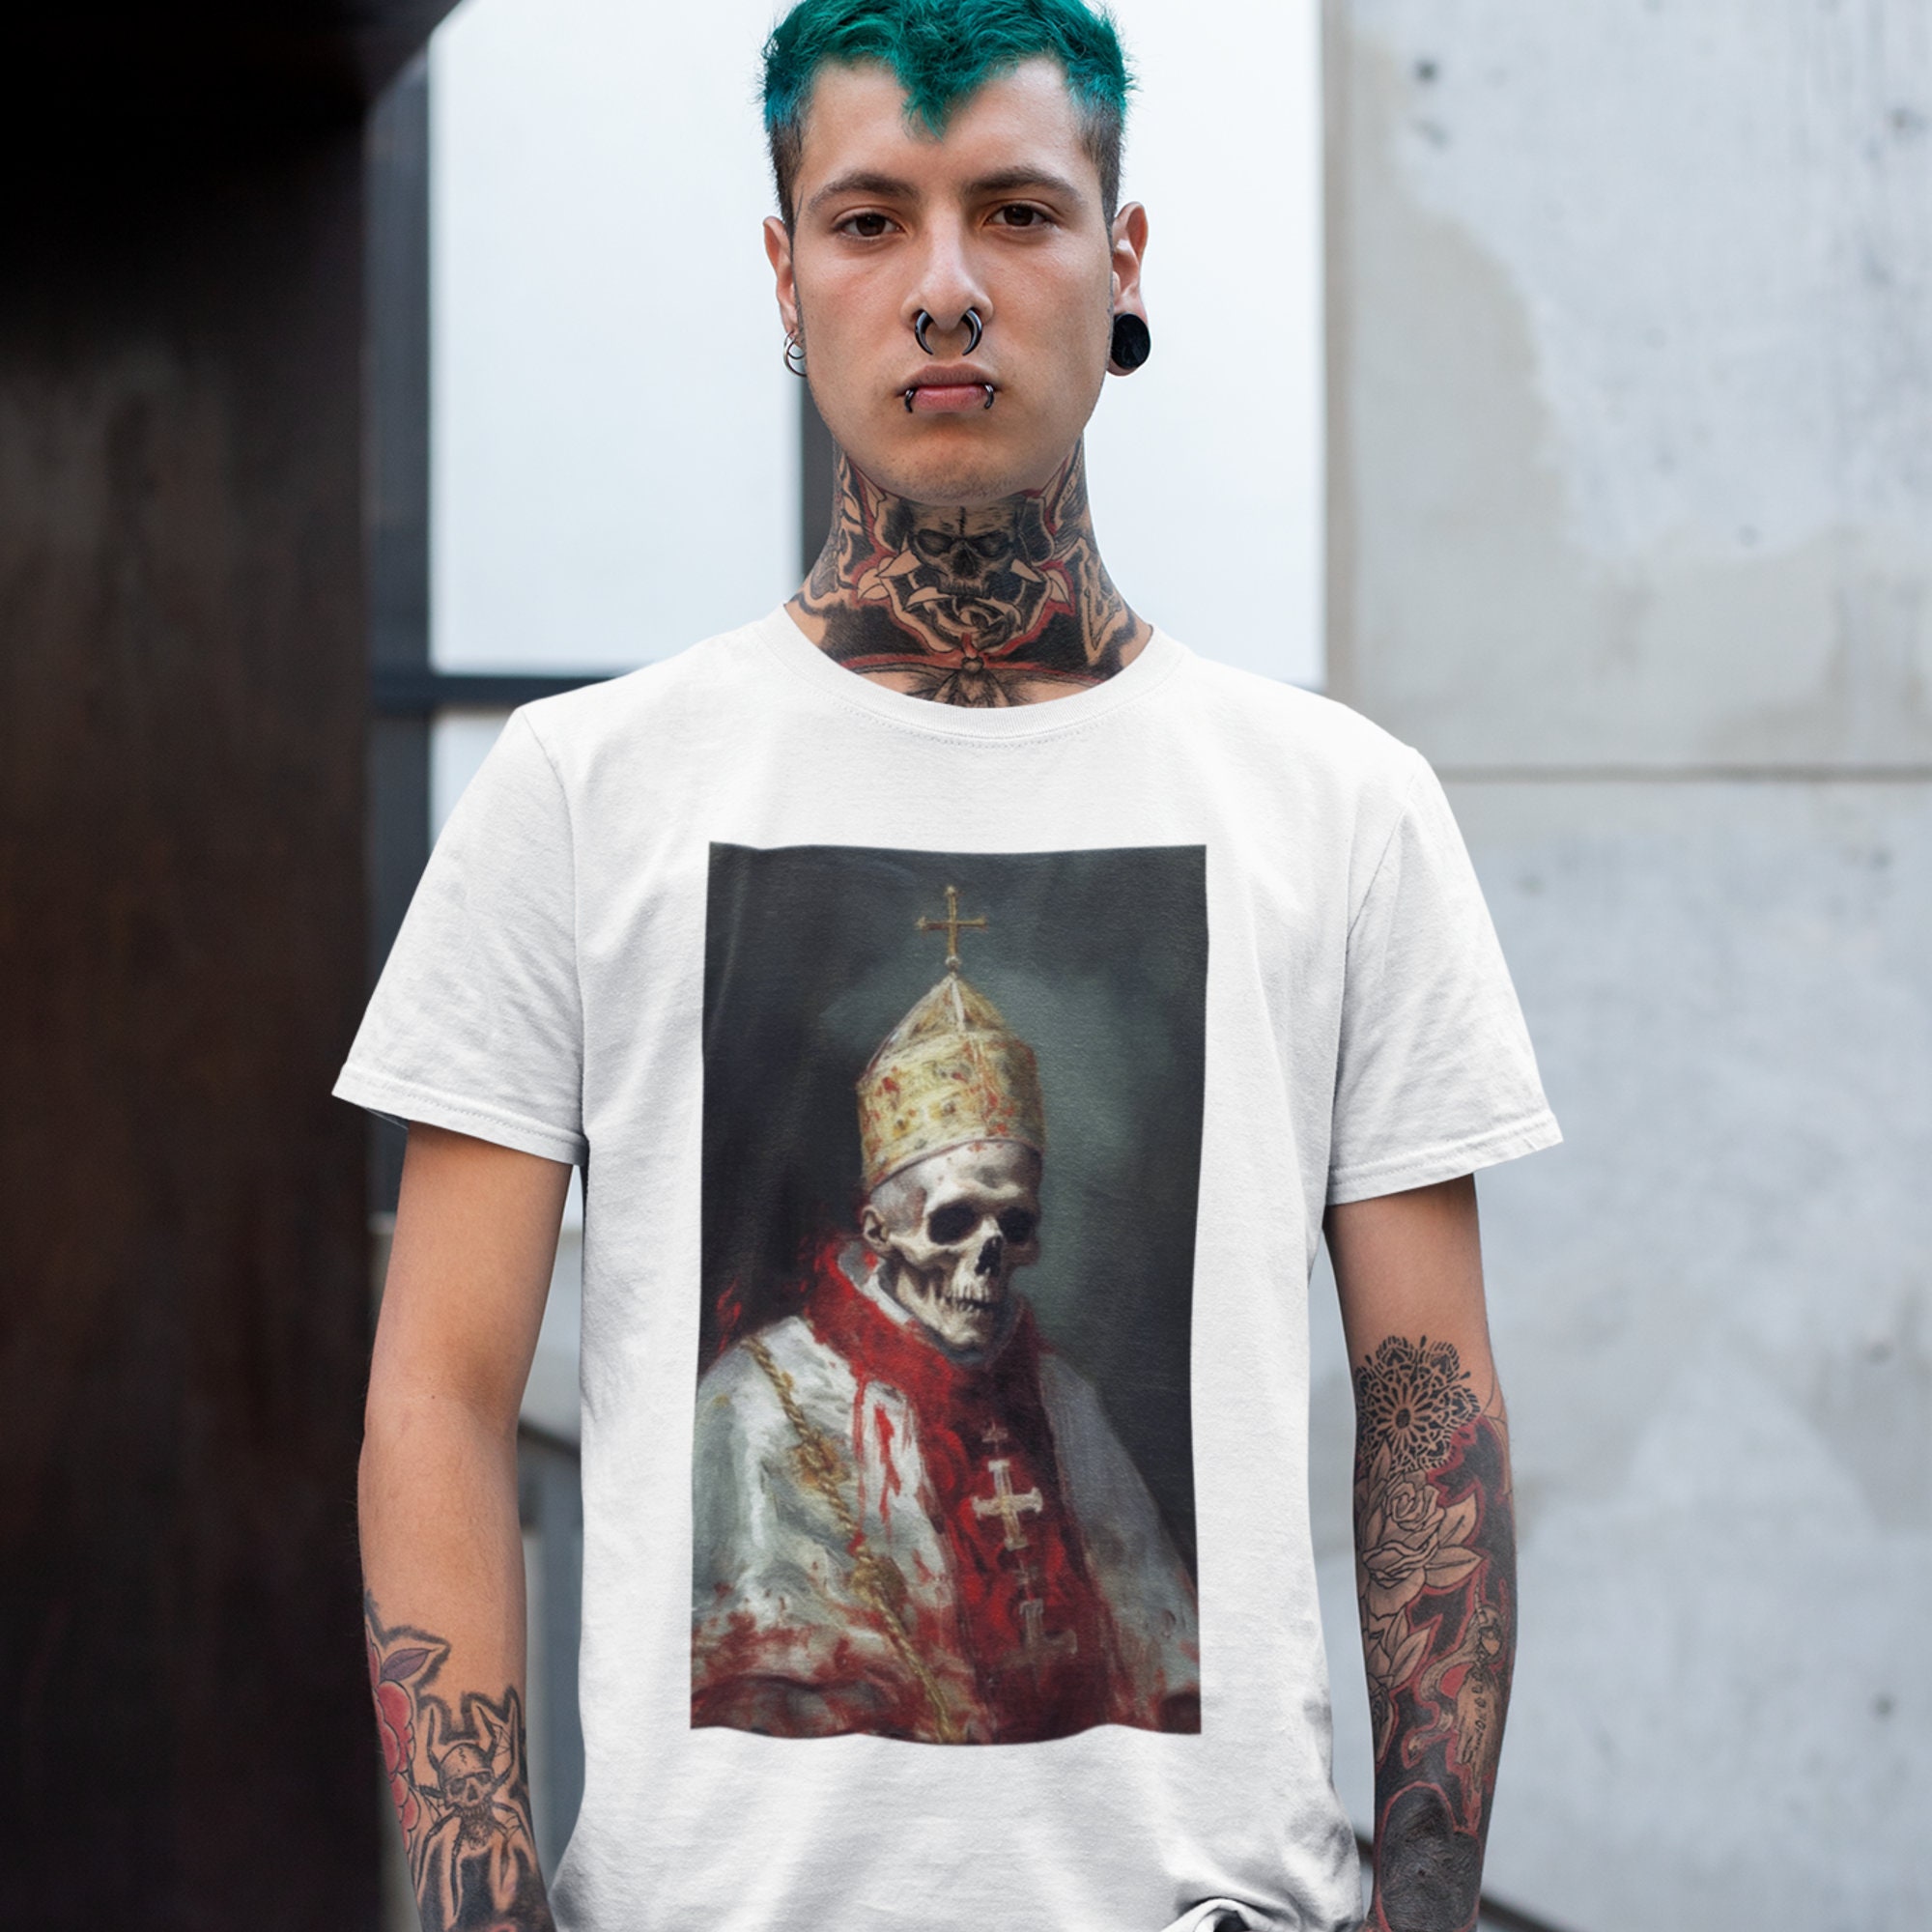 Discover Undead Dead Zombie Pope Goth T Shirt Dark Academia Shirt Spooky Punk Apparel Witch Halloween Shirt Alt Gothic Clothing Satanic Tees Evil